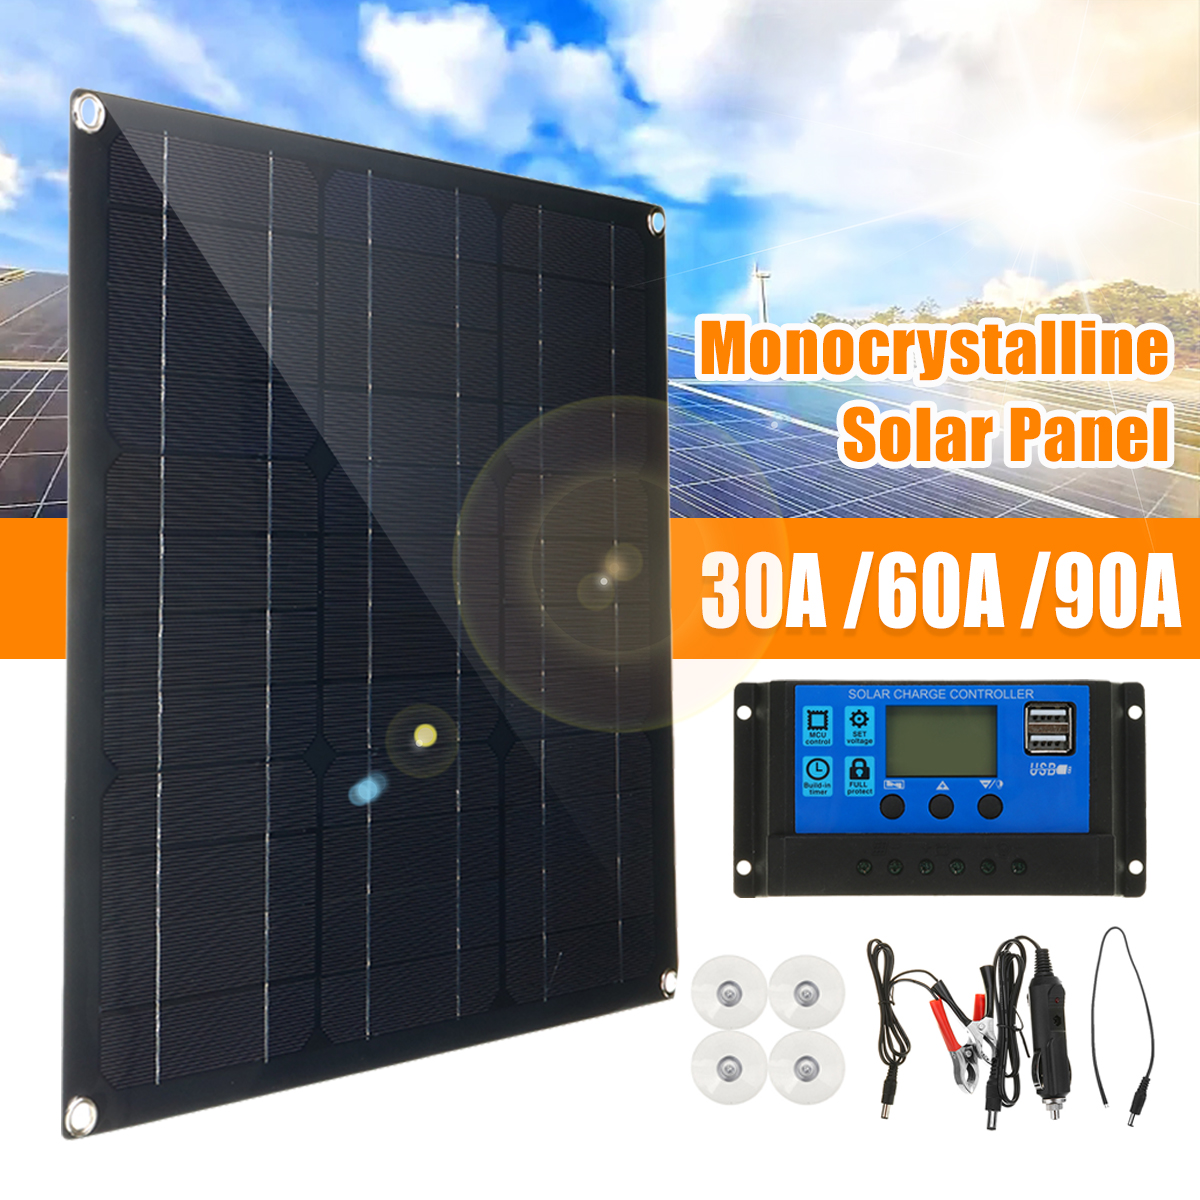 30-90A-Solar-Panel-Kit-Dual-USB-Port-Battery-Charger-LCD-Controller-With-4Pcs-Suckers-1848021-1